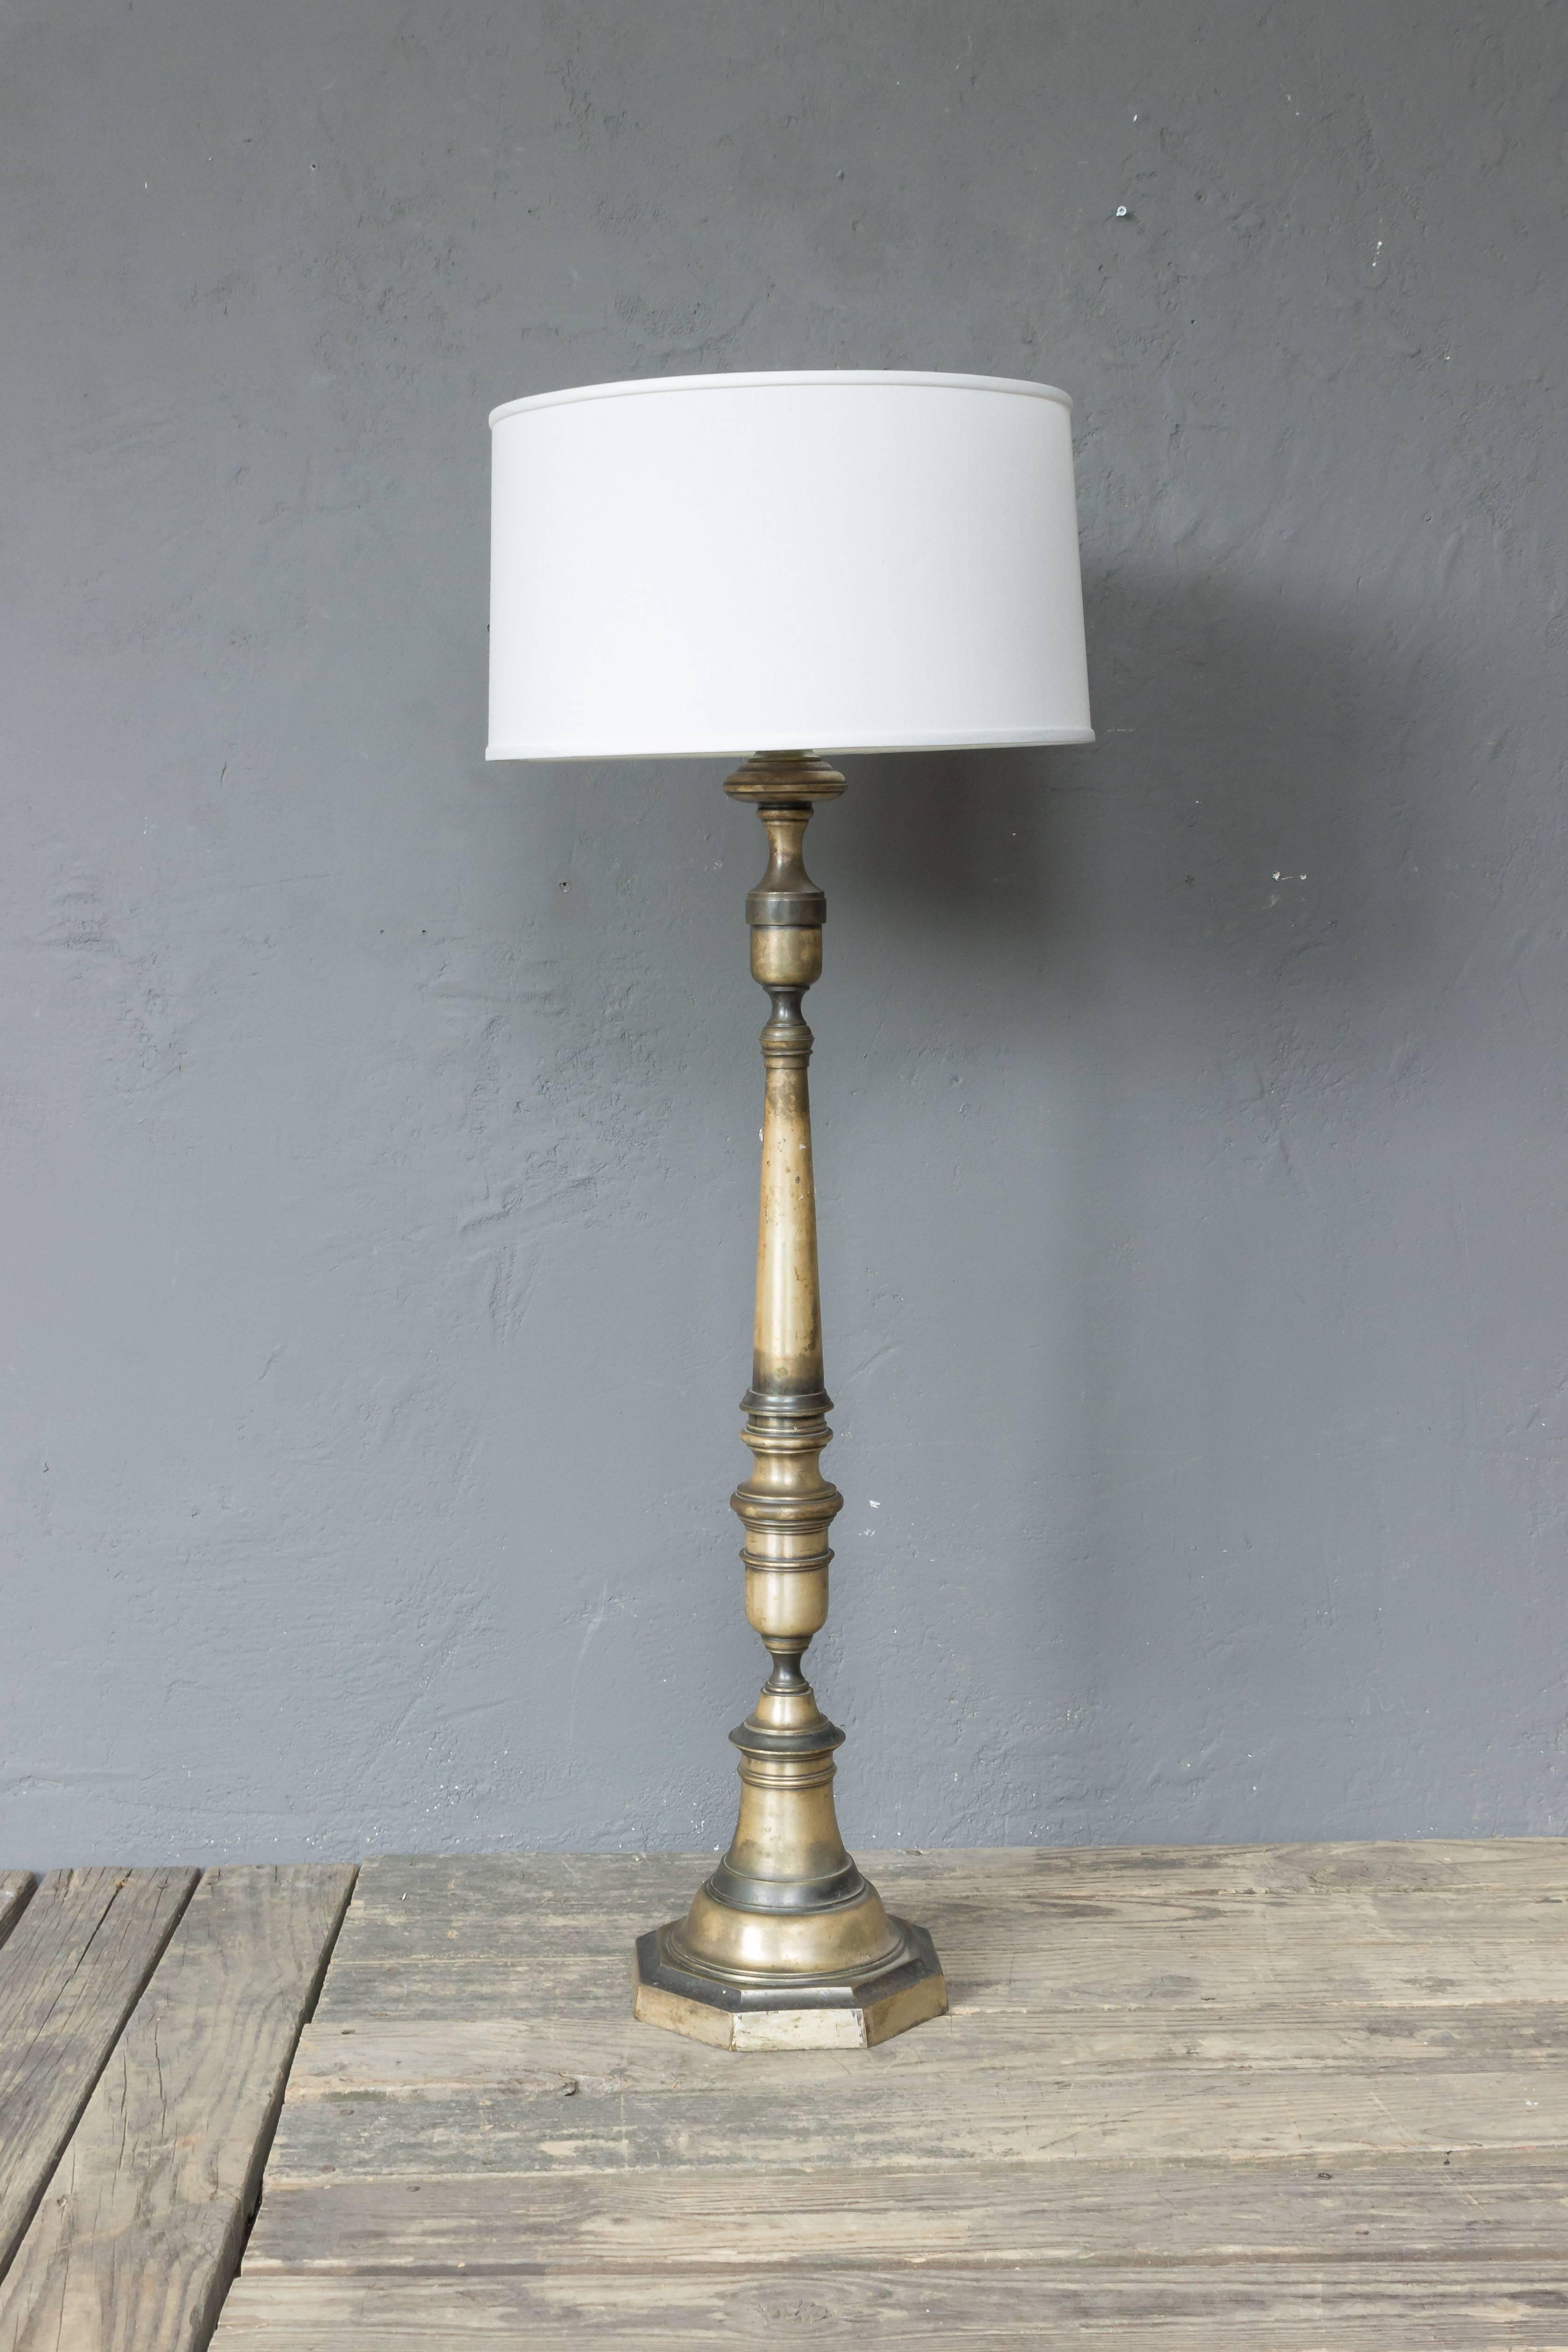 Silvered bronze floor lamp with patinated finish. Silvered bronze floor lamp with patinated finish. Very good quality. French, 1940s. Price includes hand polishing and new wiring. The plating is original and shows tarnishing and wear. The item is